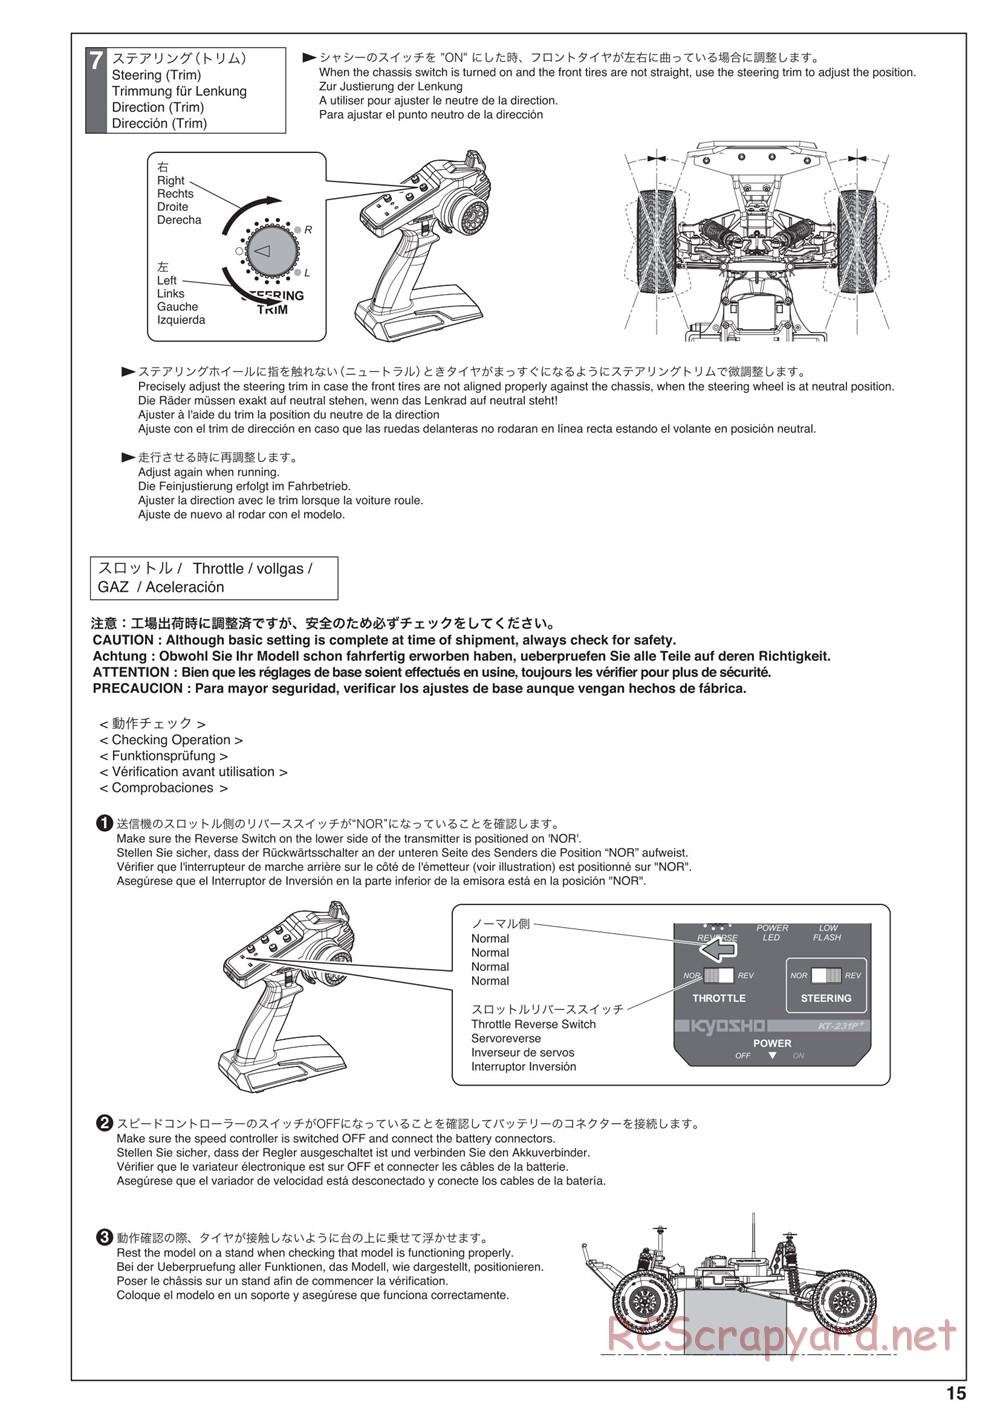 Kyosho - Outlaw Rampage - Manual - Page 15